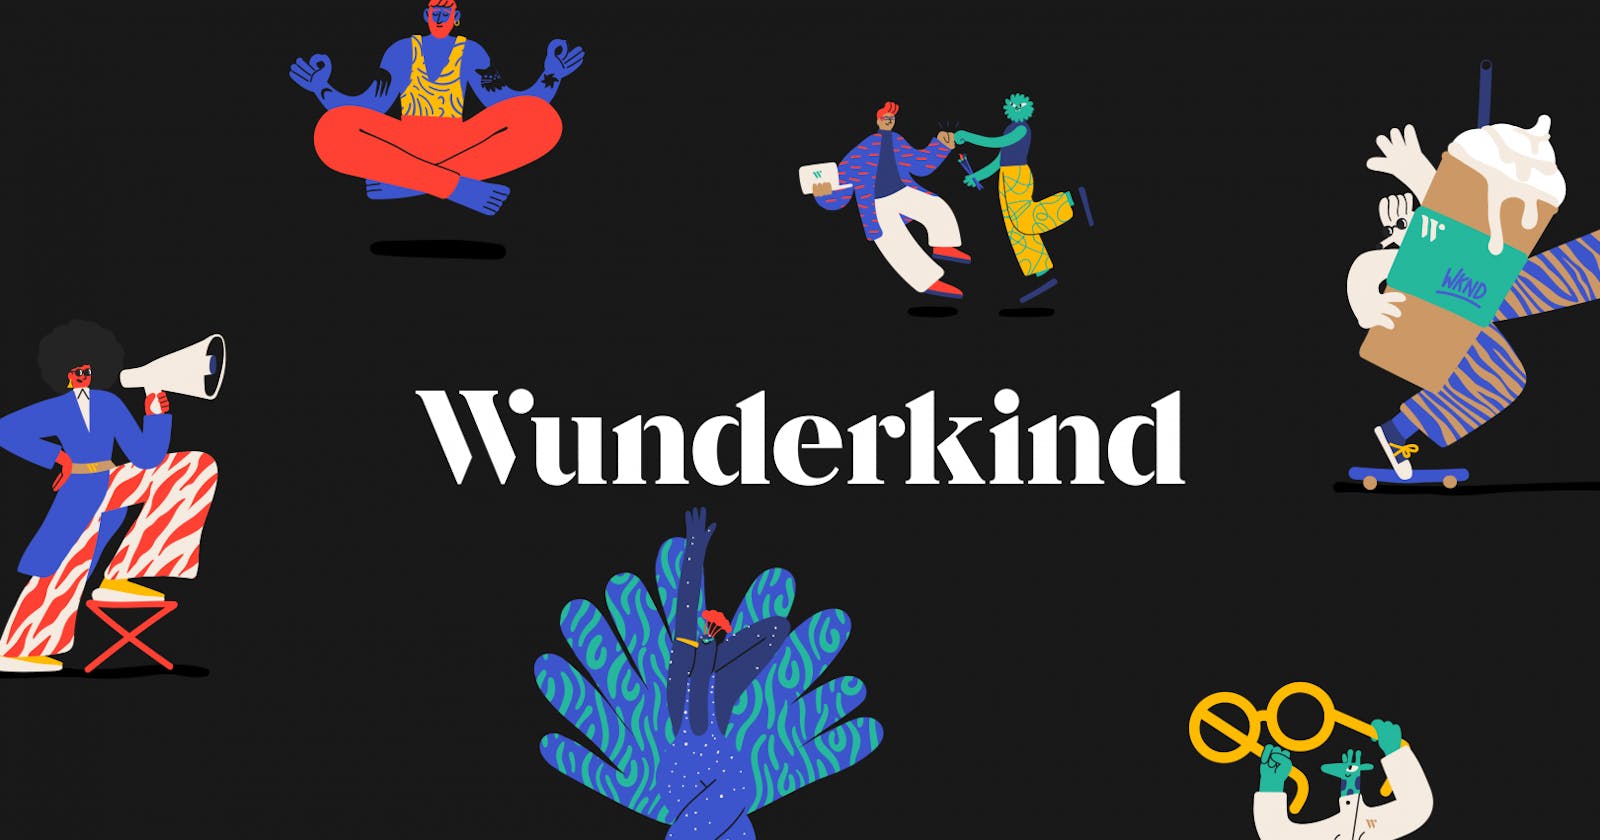 Wunderkind: The Digital Marketing Company You Should Know